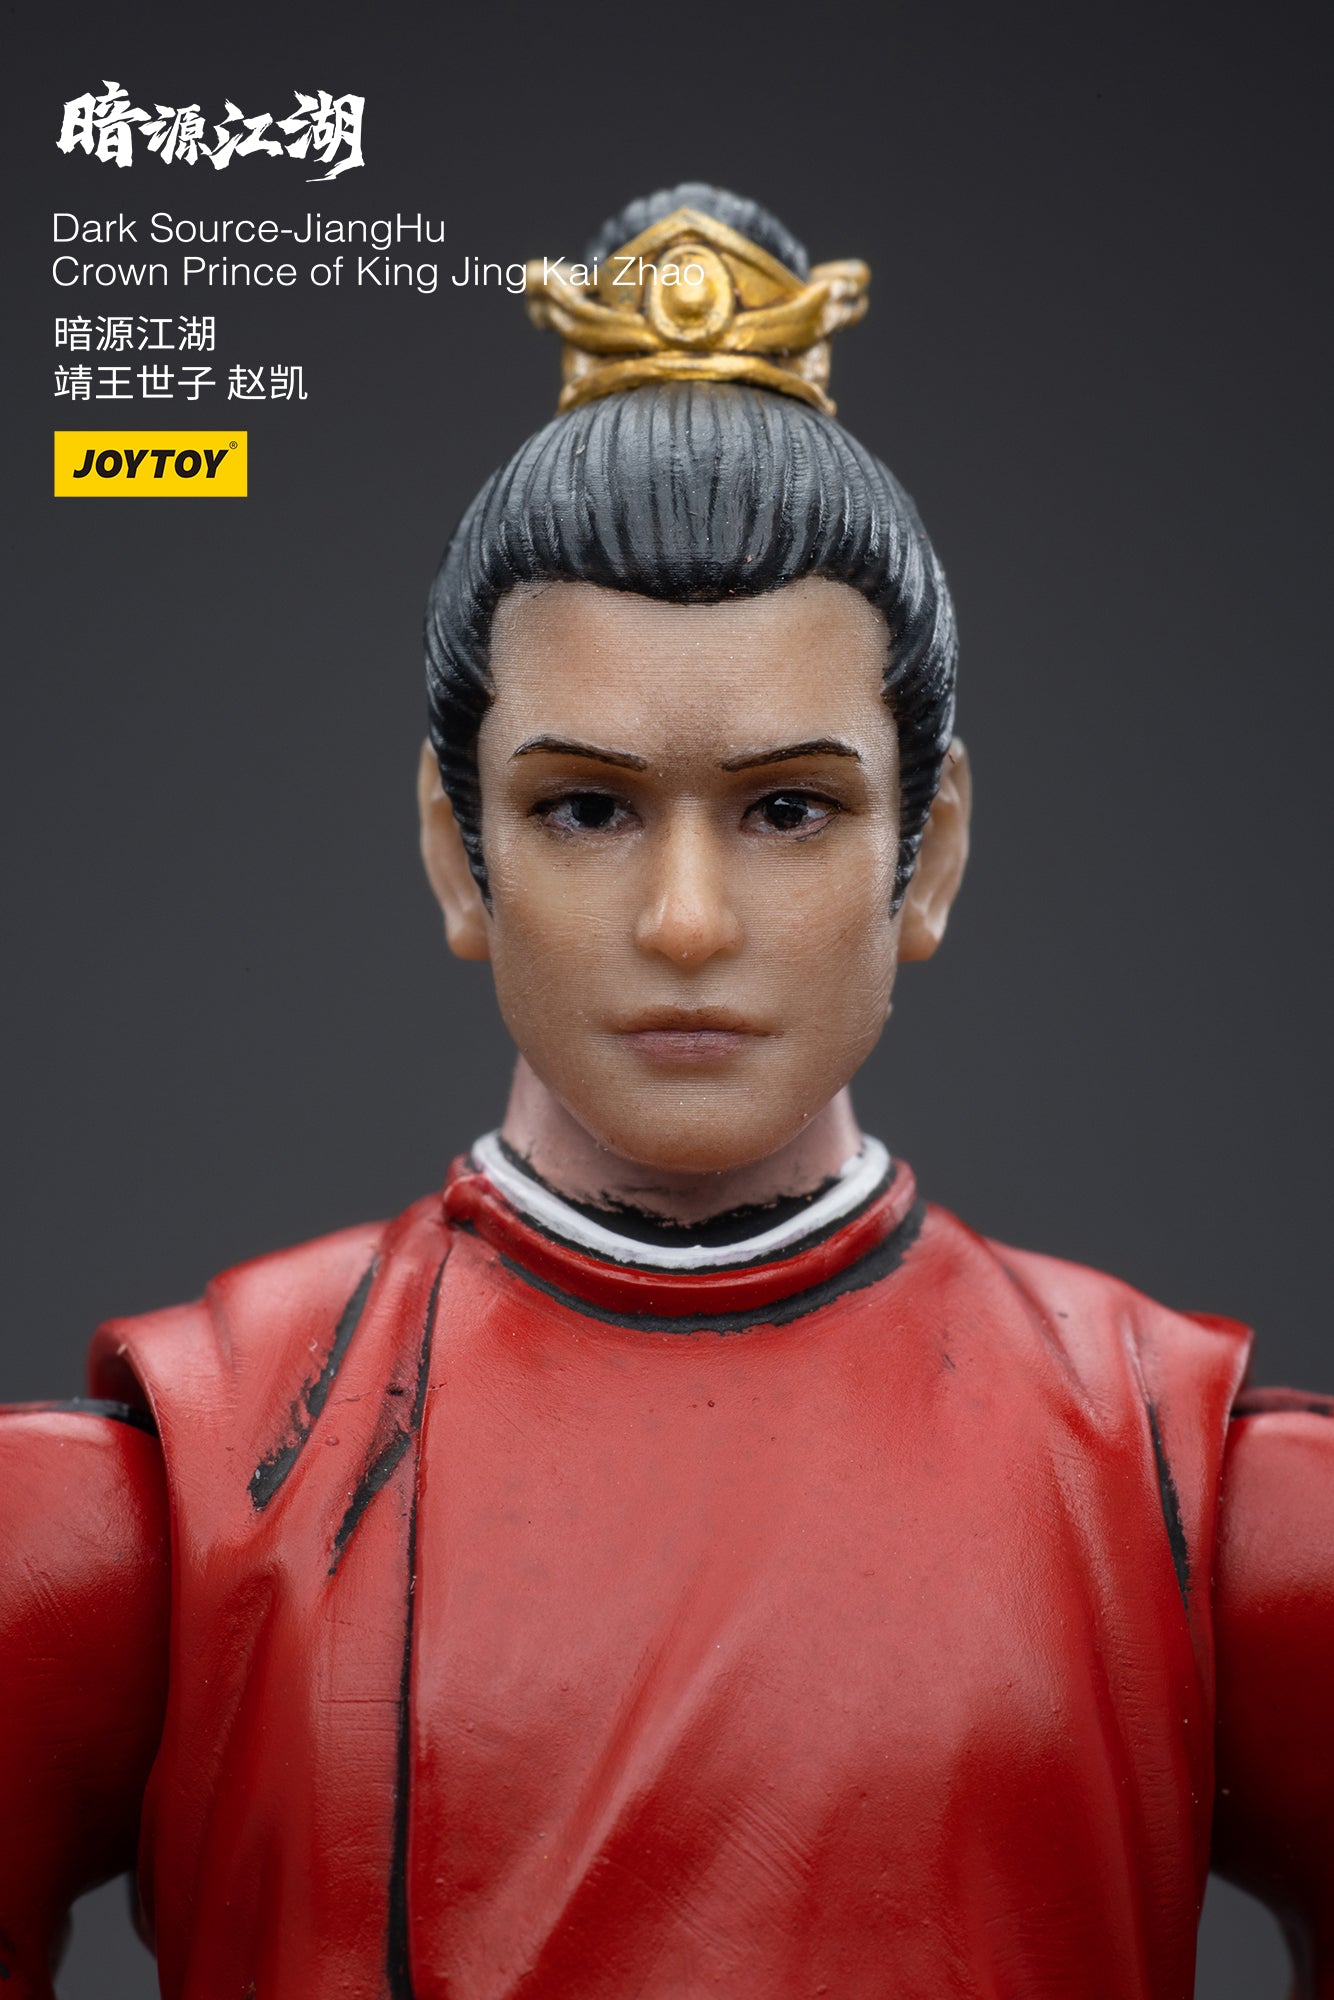 Joy Toy Dark Source Jianghu Crown Prince of King Jing Kai Zhao figure is incredibly detailed in 1/18 scale. JoyToy, each figure is highly articulated and includes accessories. 